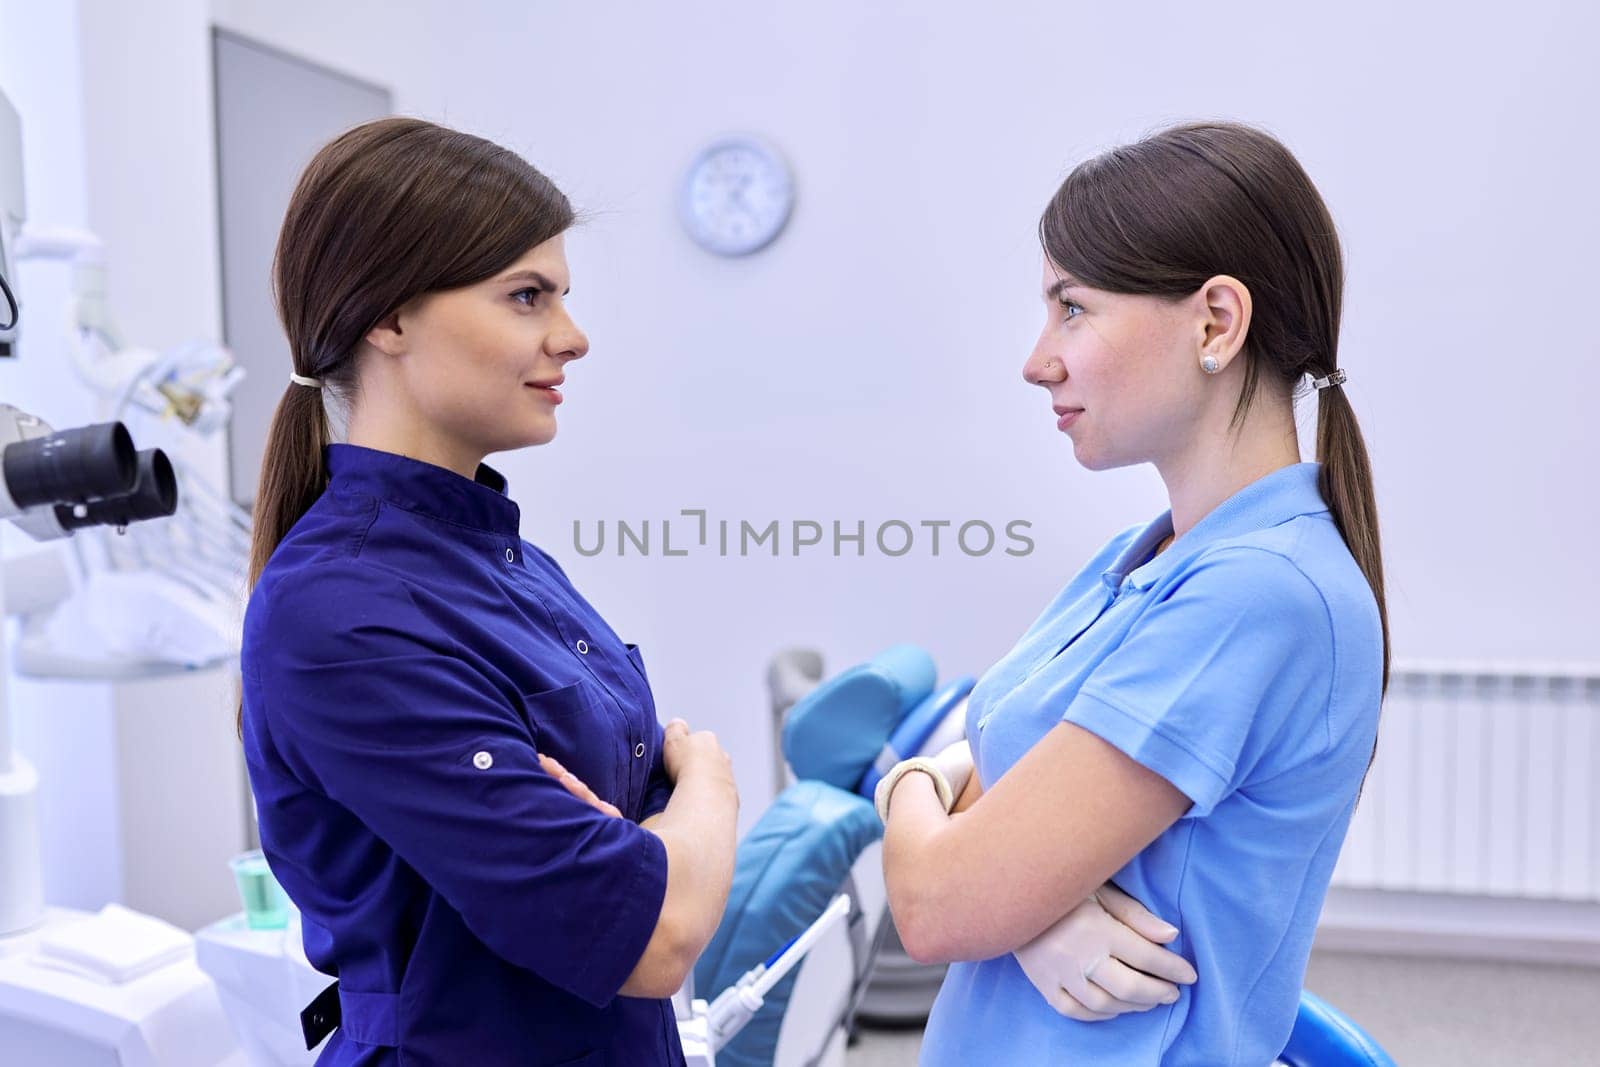 Team of two doctors women dentists in the dental office, female colleagues look at each other, view in profile. Medicine, dentistry and health care concept